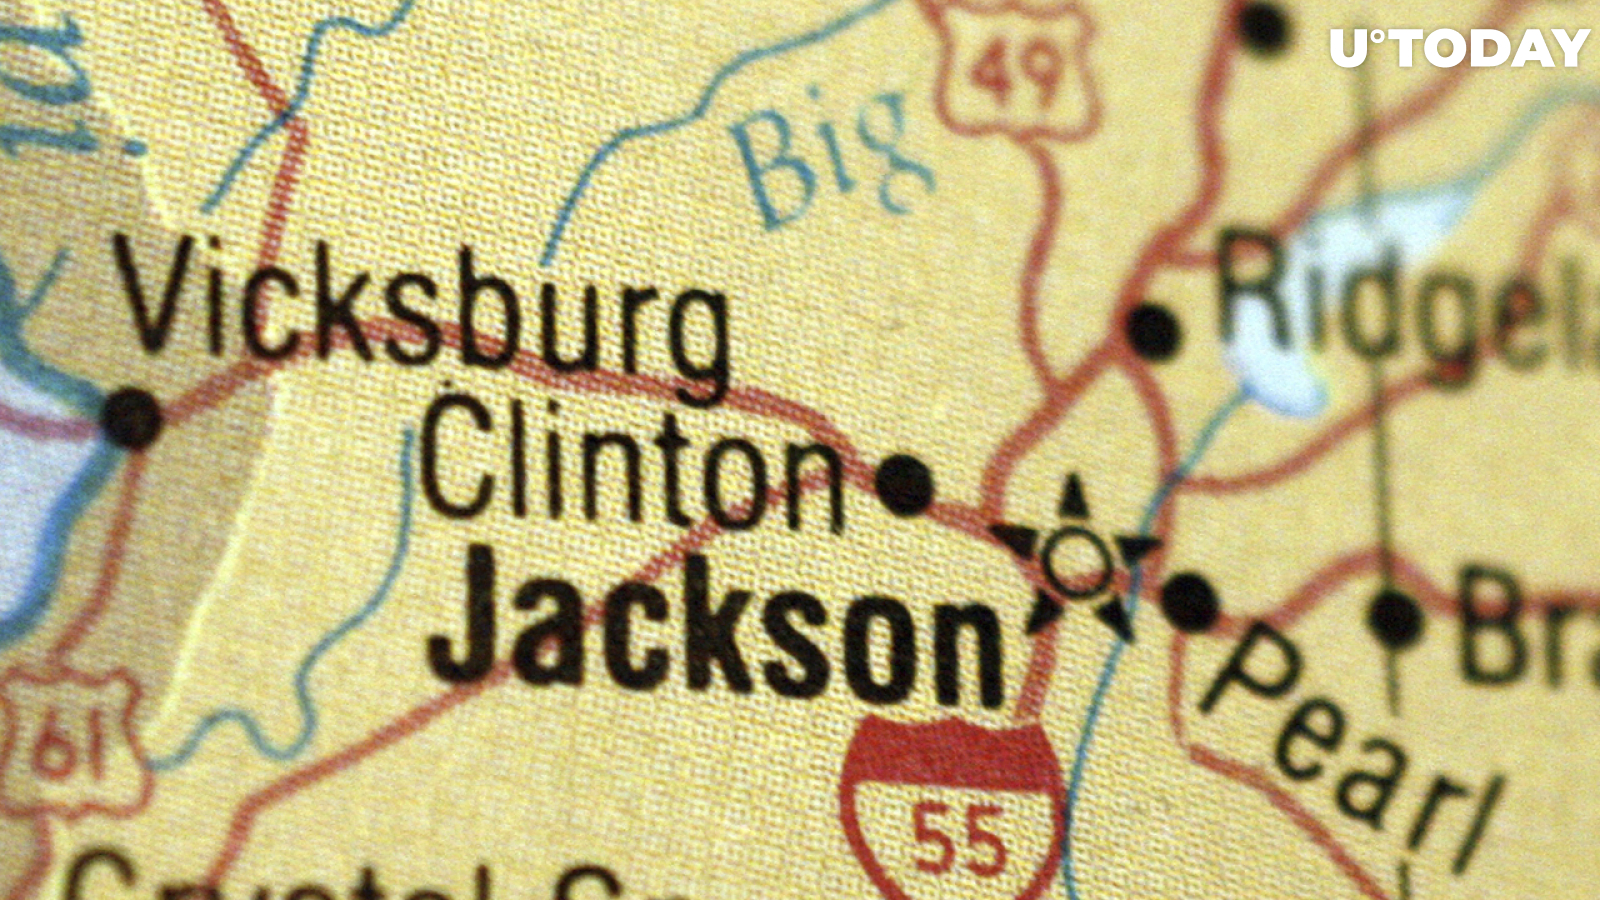 City of Jackson to Make History with Cryptocurrency Payroll Conversion